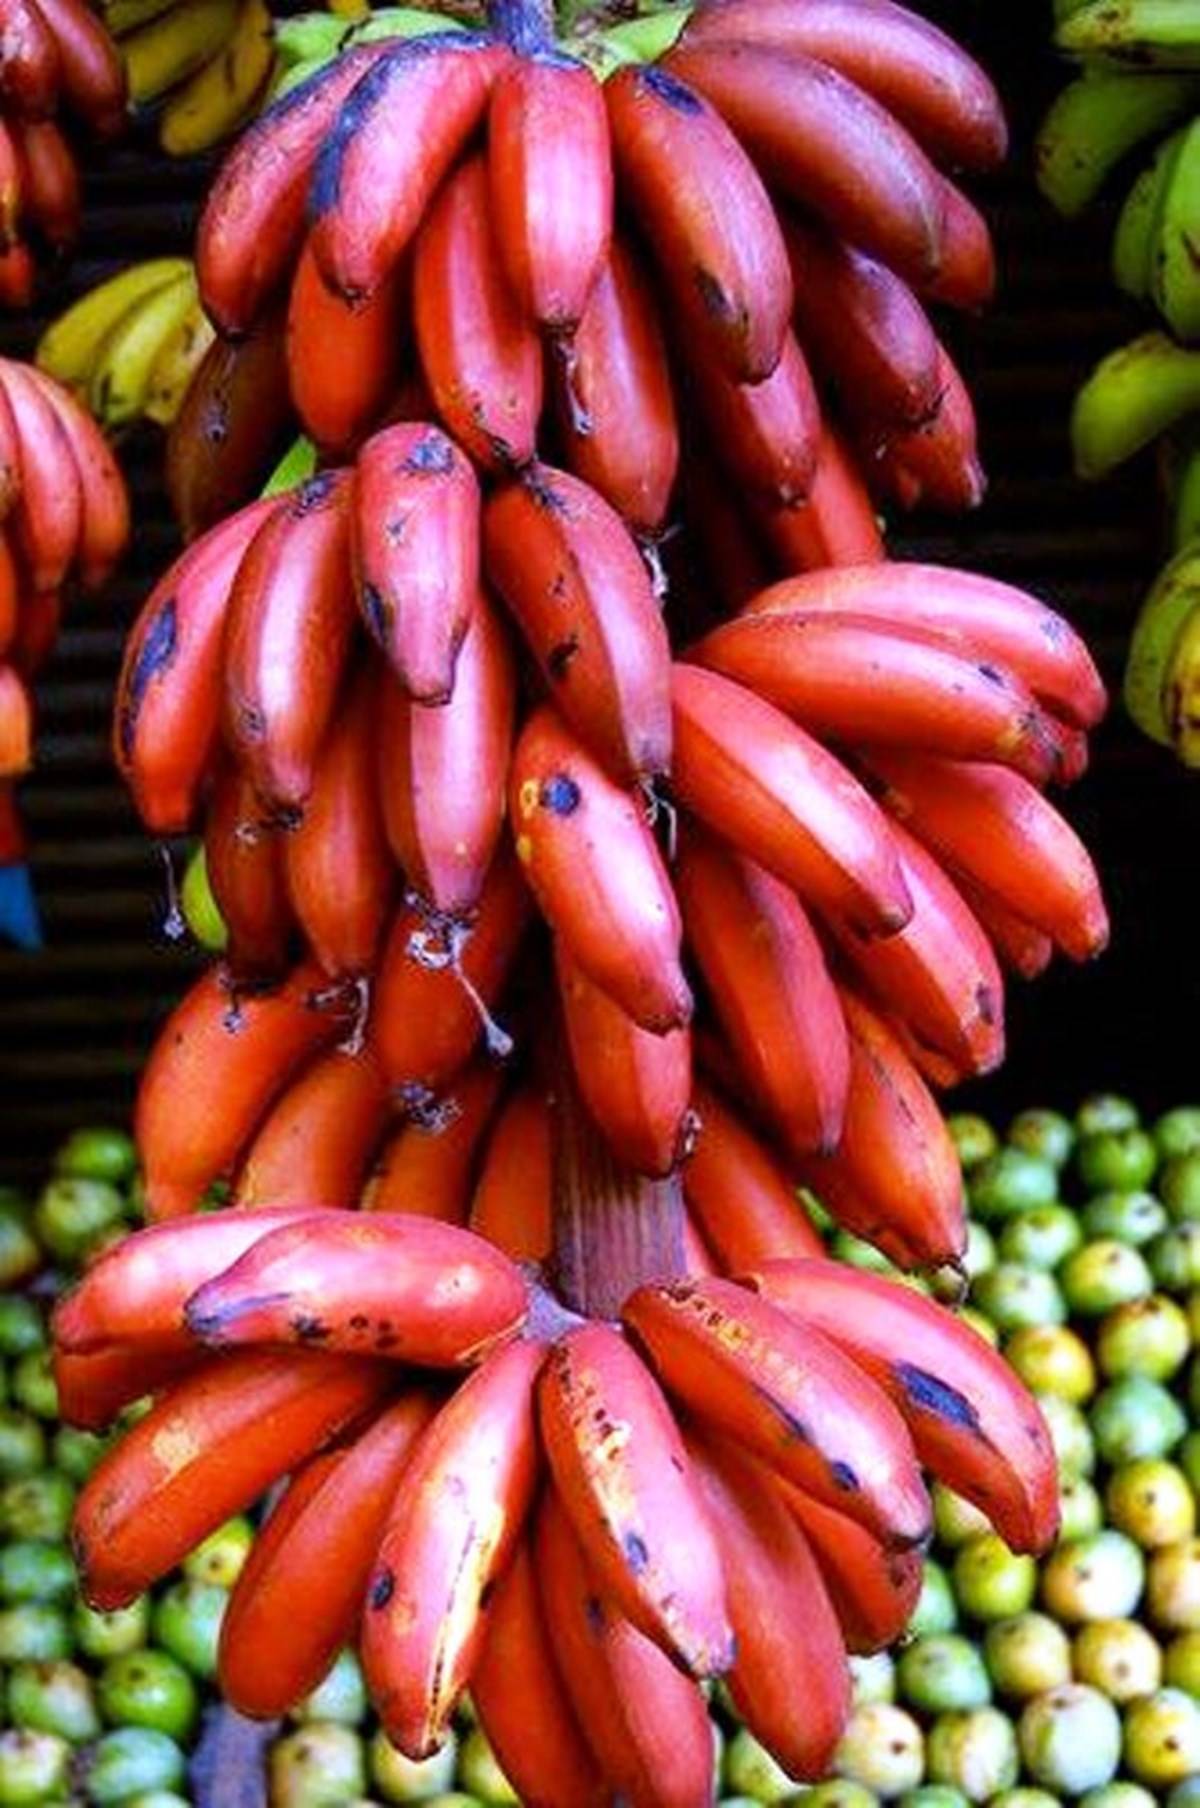 Super Food: The Bananas and their Health Benefits